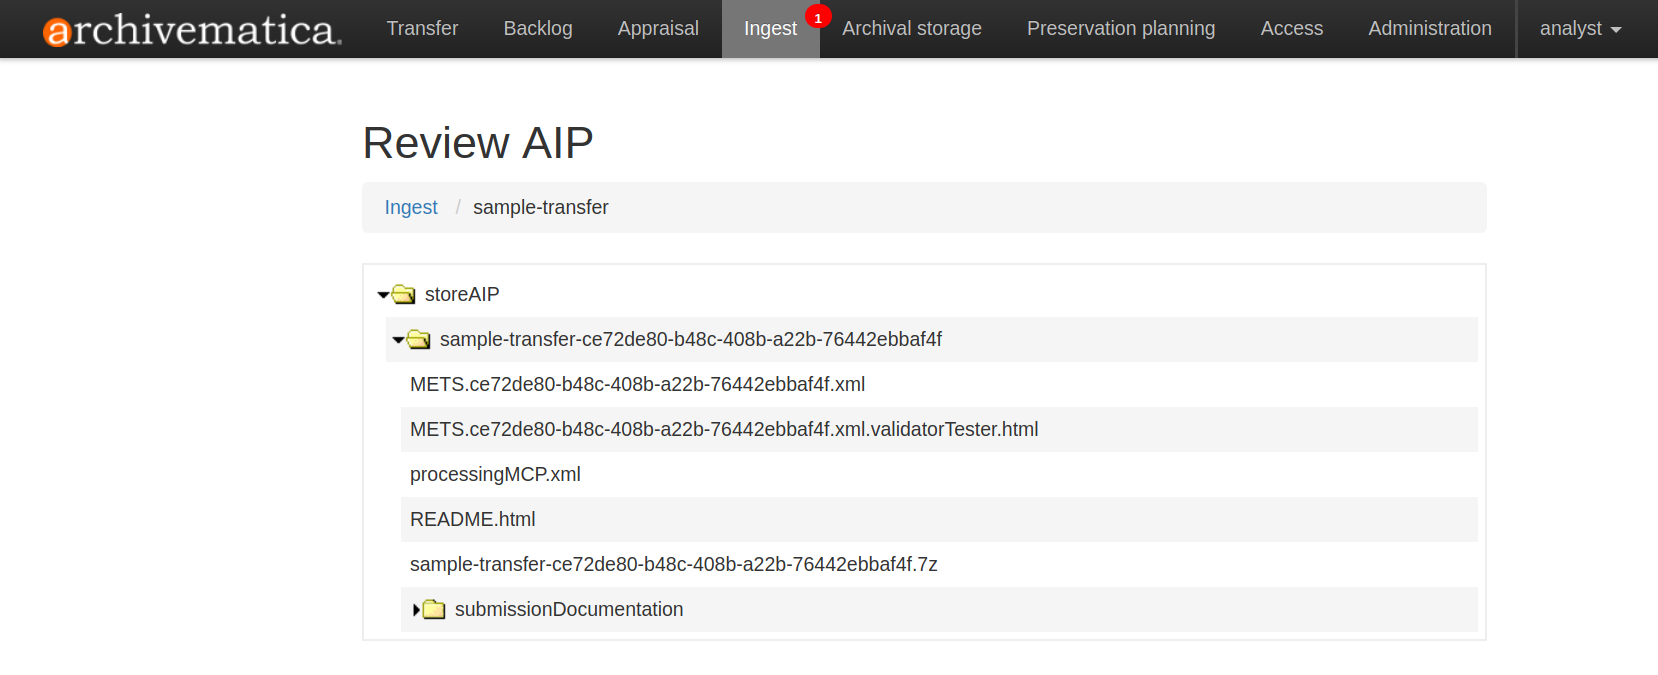 The AIP review page showing an expanded AIP file structure